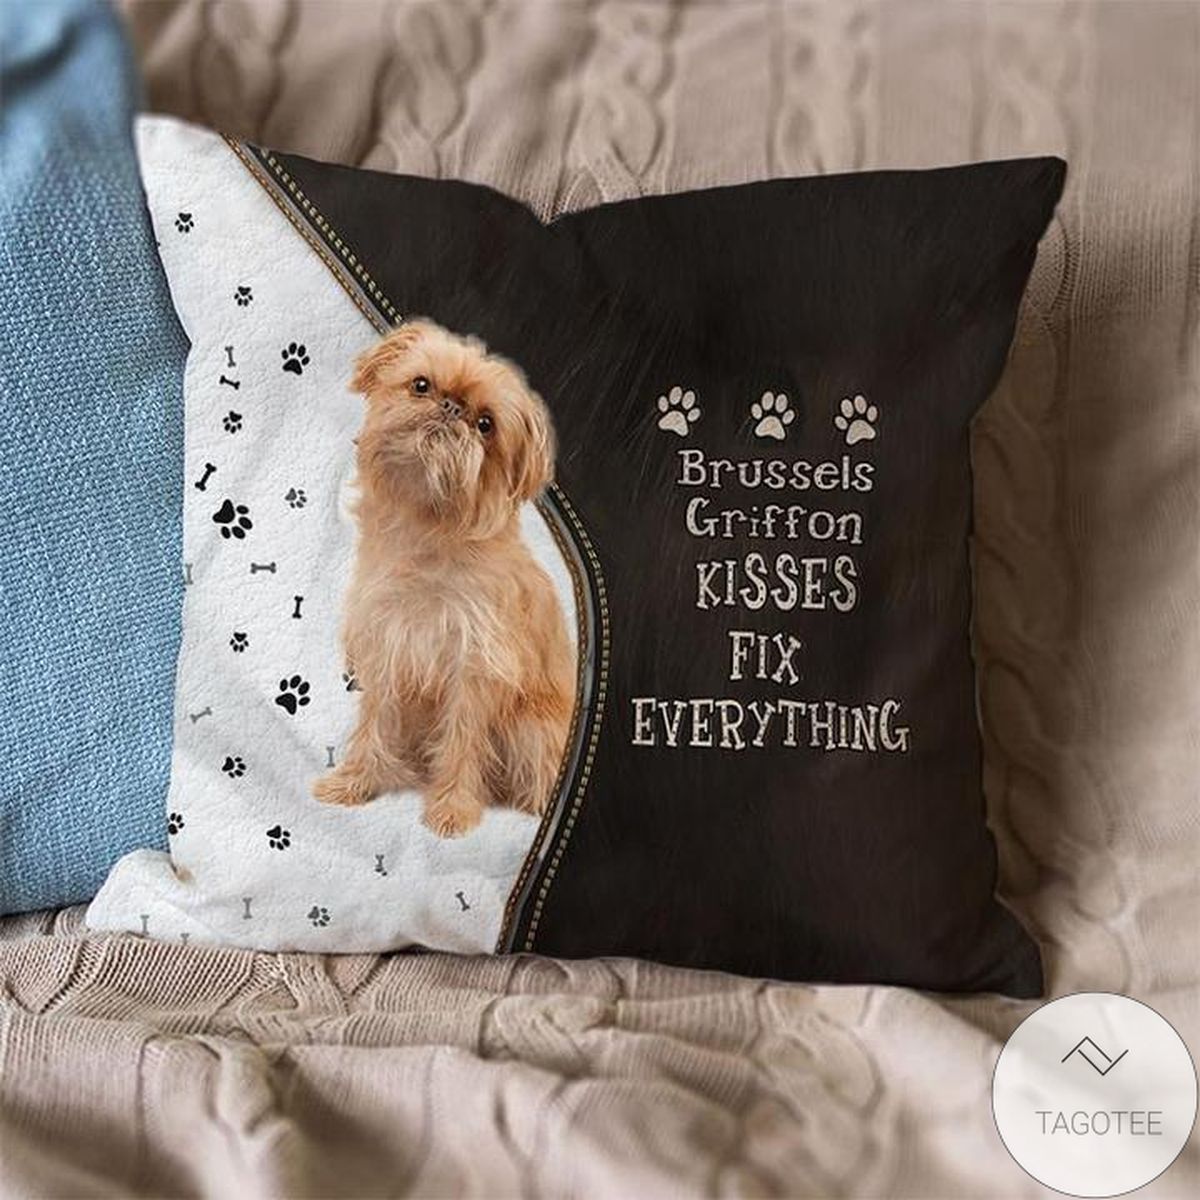 Brussels Griffon Kisses Fix Everything Pillowcase